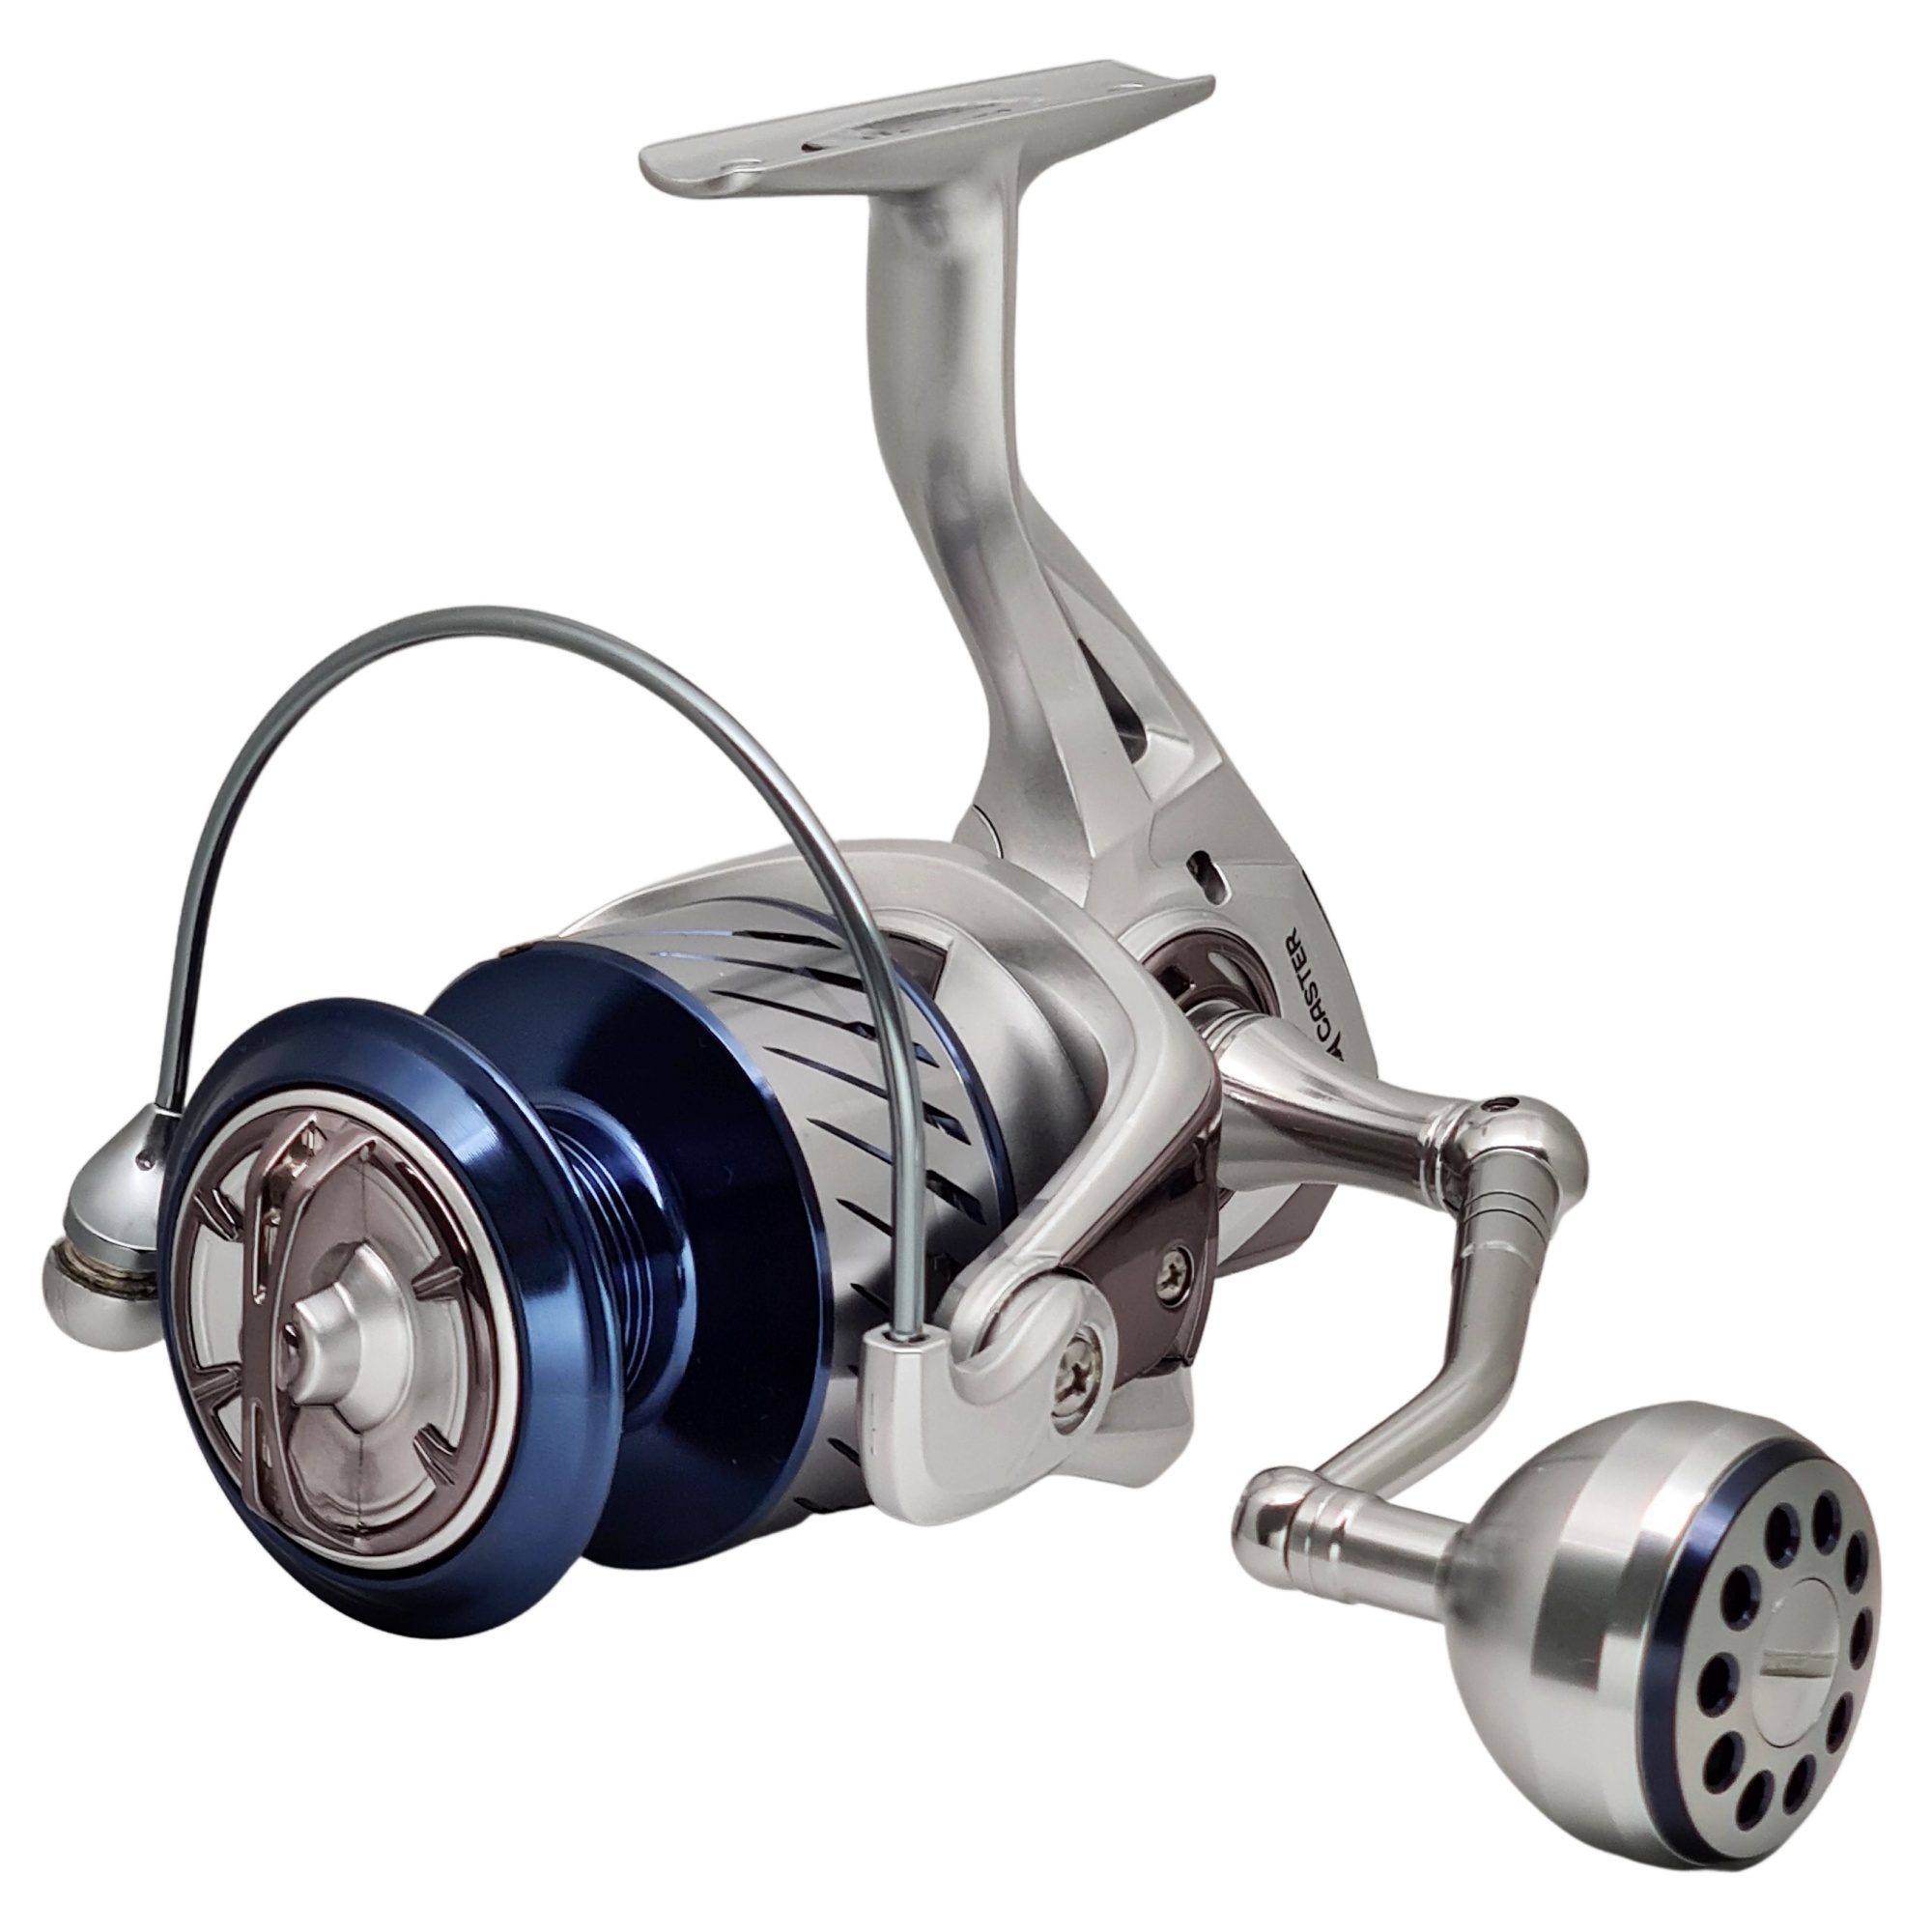 Reel Frontal Caster Oceanic 6008 SW Agua Salada 8 Rulemanes